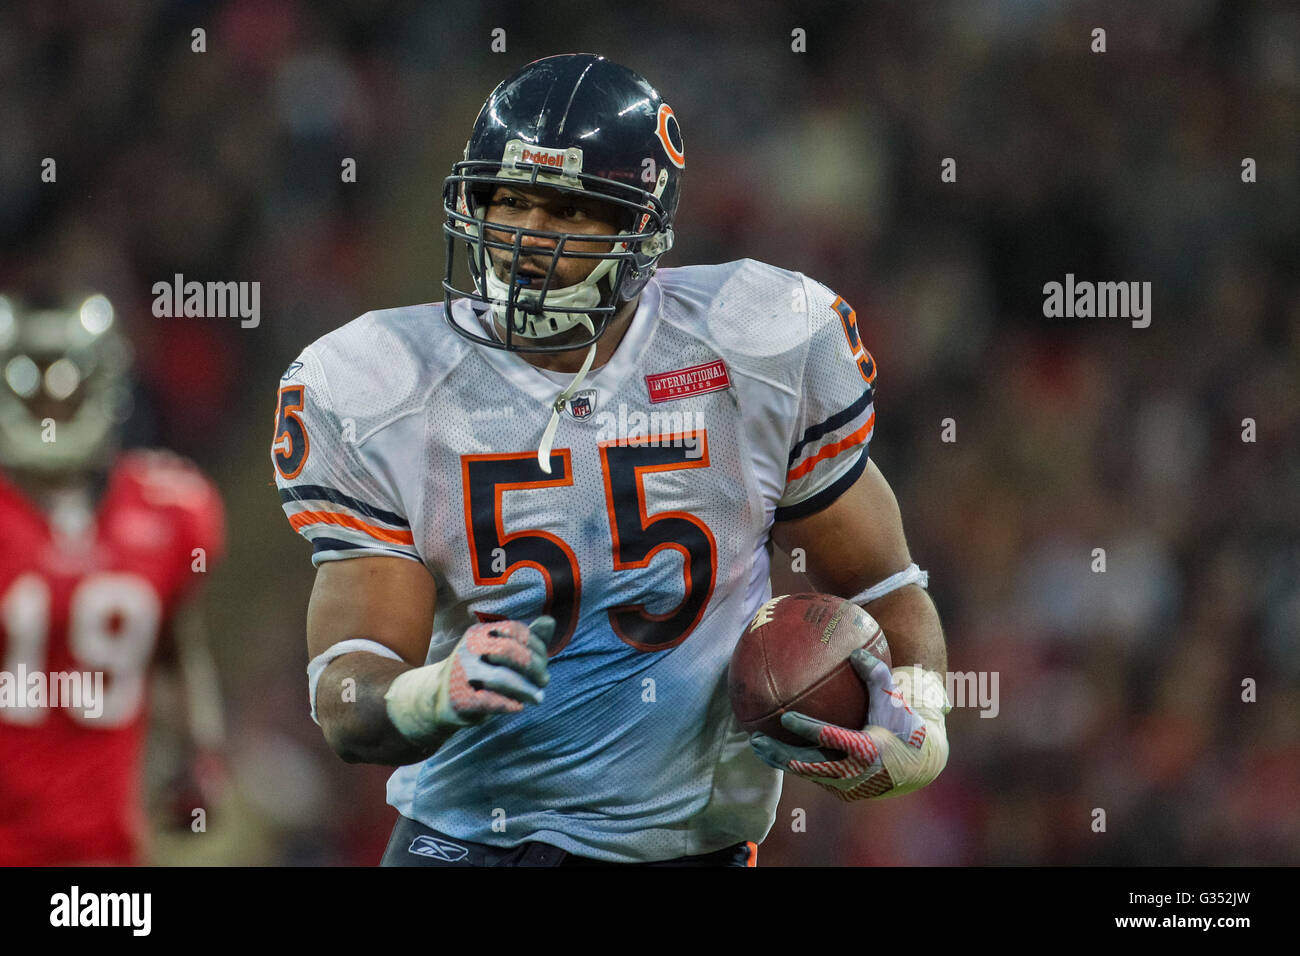 LB Lance Briggs, #55 Chicago Bears, runs with the ball during the NFL International game between the Tampa Bay Buccaneers and Stock Photo